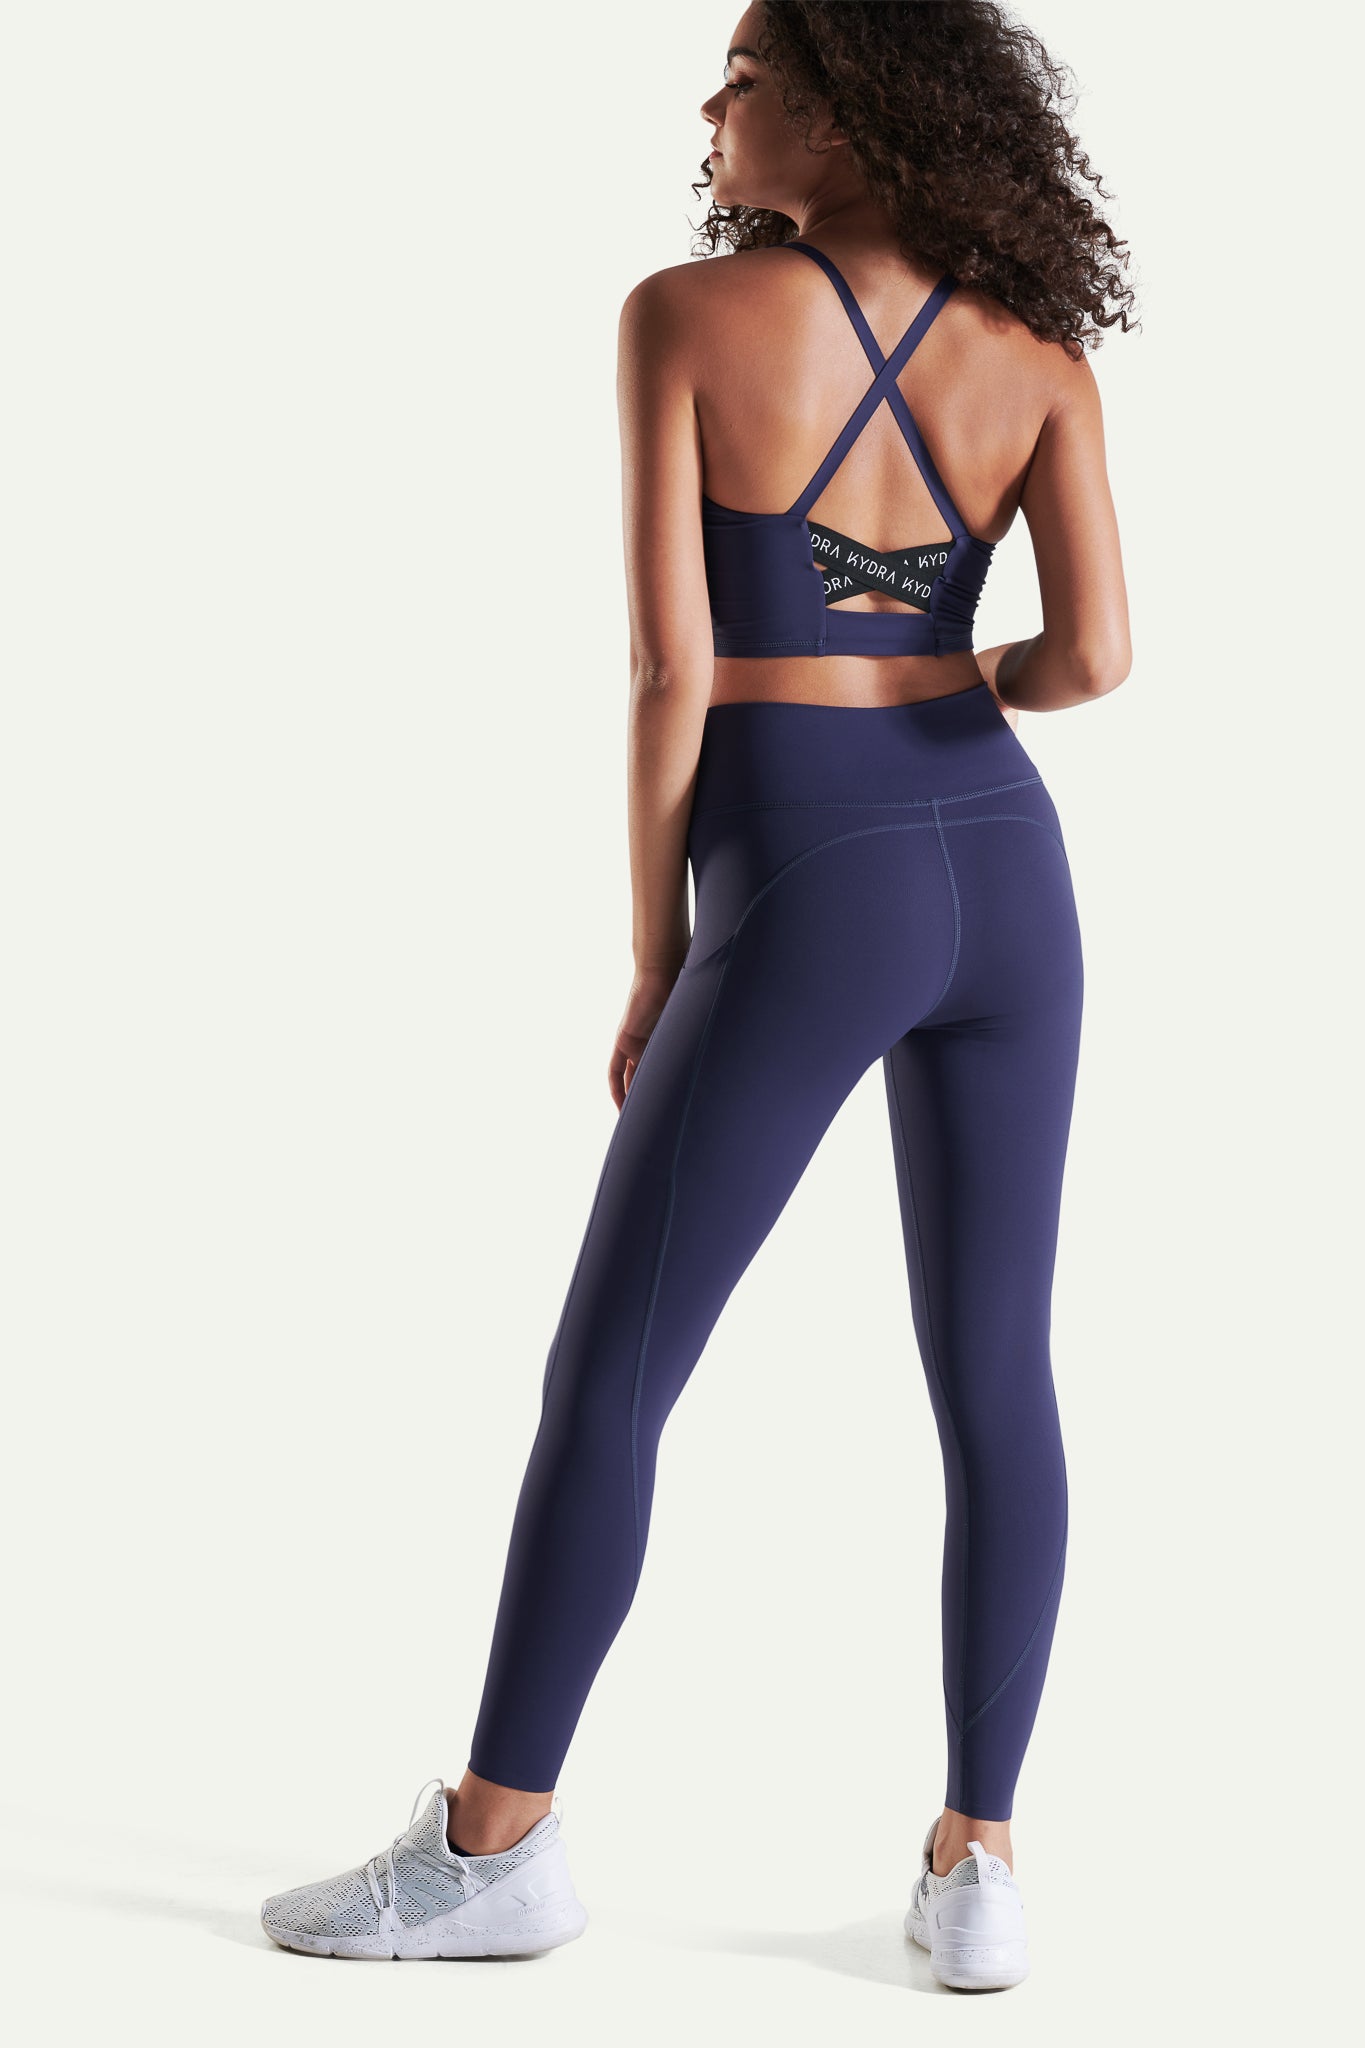 Kydra Athletics - Our bestsellers, Thalia Bra & Kyro Leggings, are flying  off the shelves! 🤸‍♀️ We're turning four with a sitewide 20% off, includes  clearance. No minimum spend required. Wait no